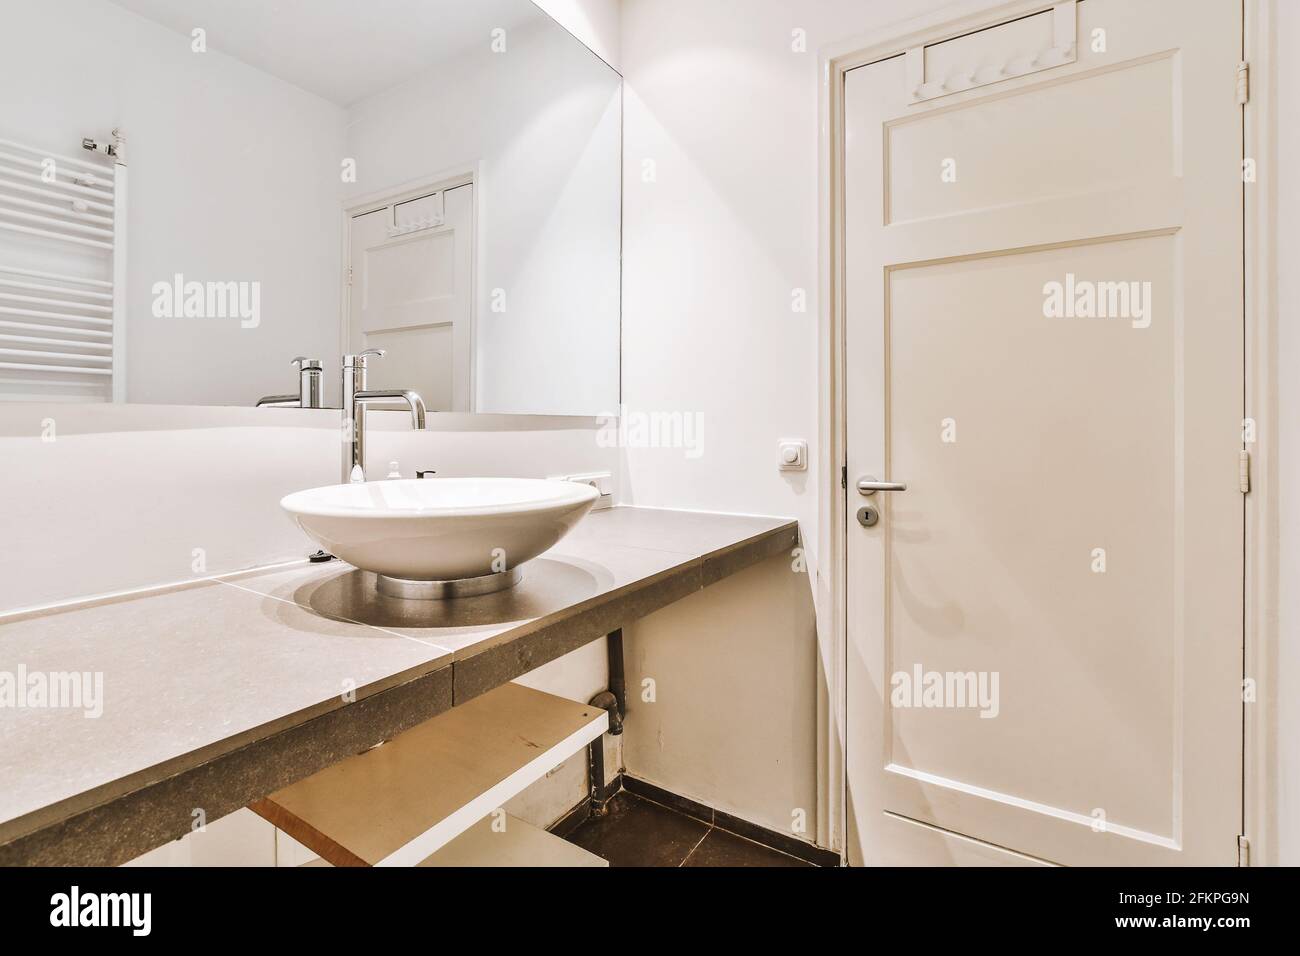 Sink in modern bathroom at home Stock Photo